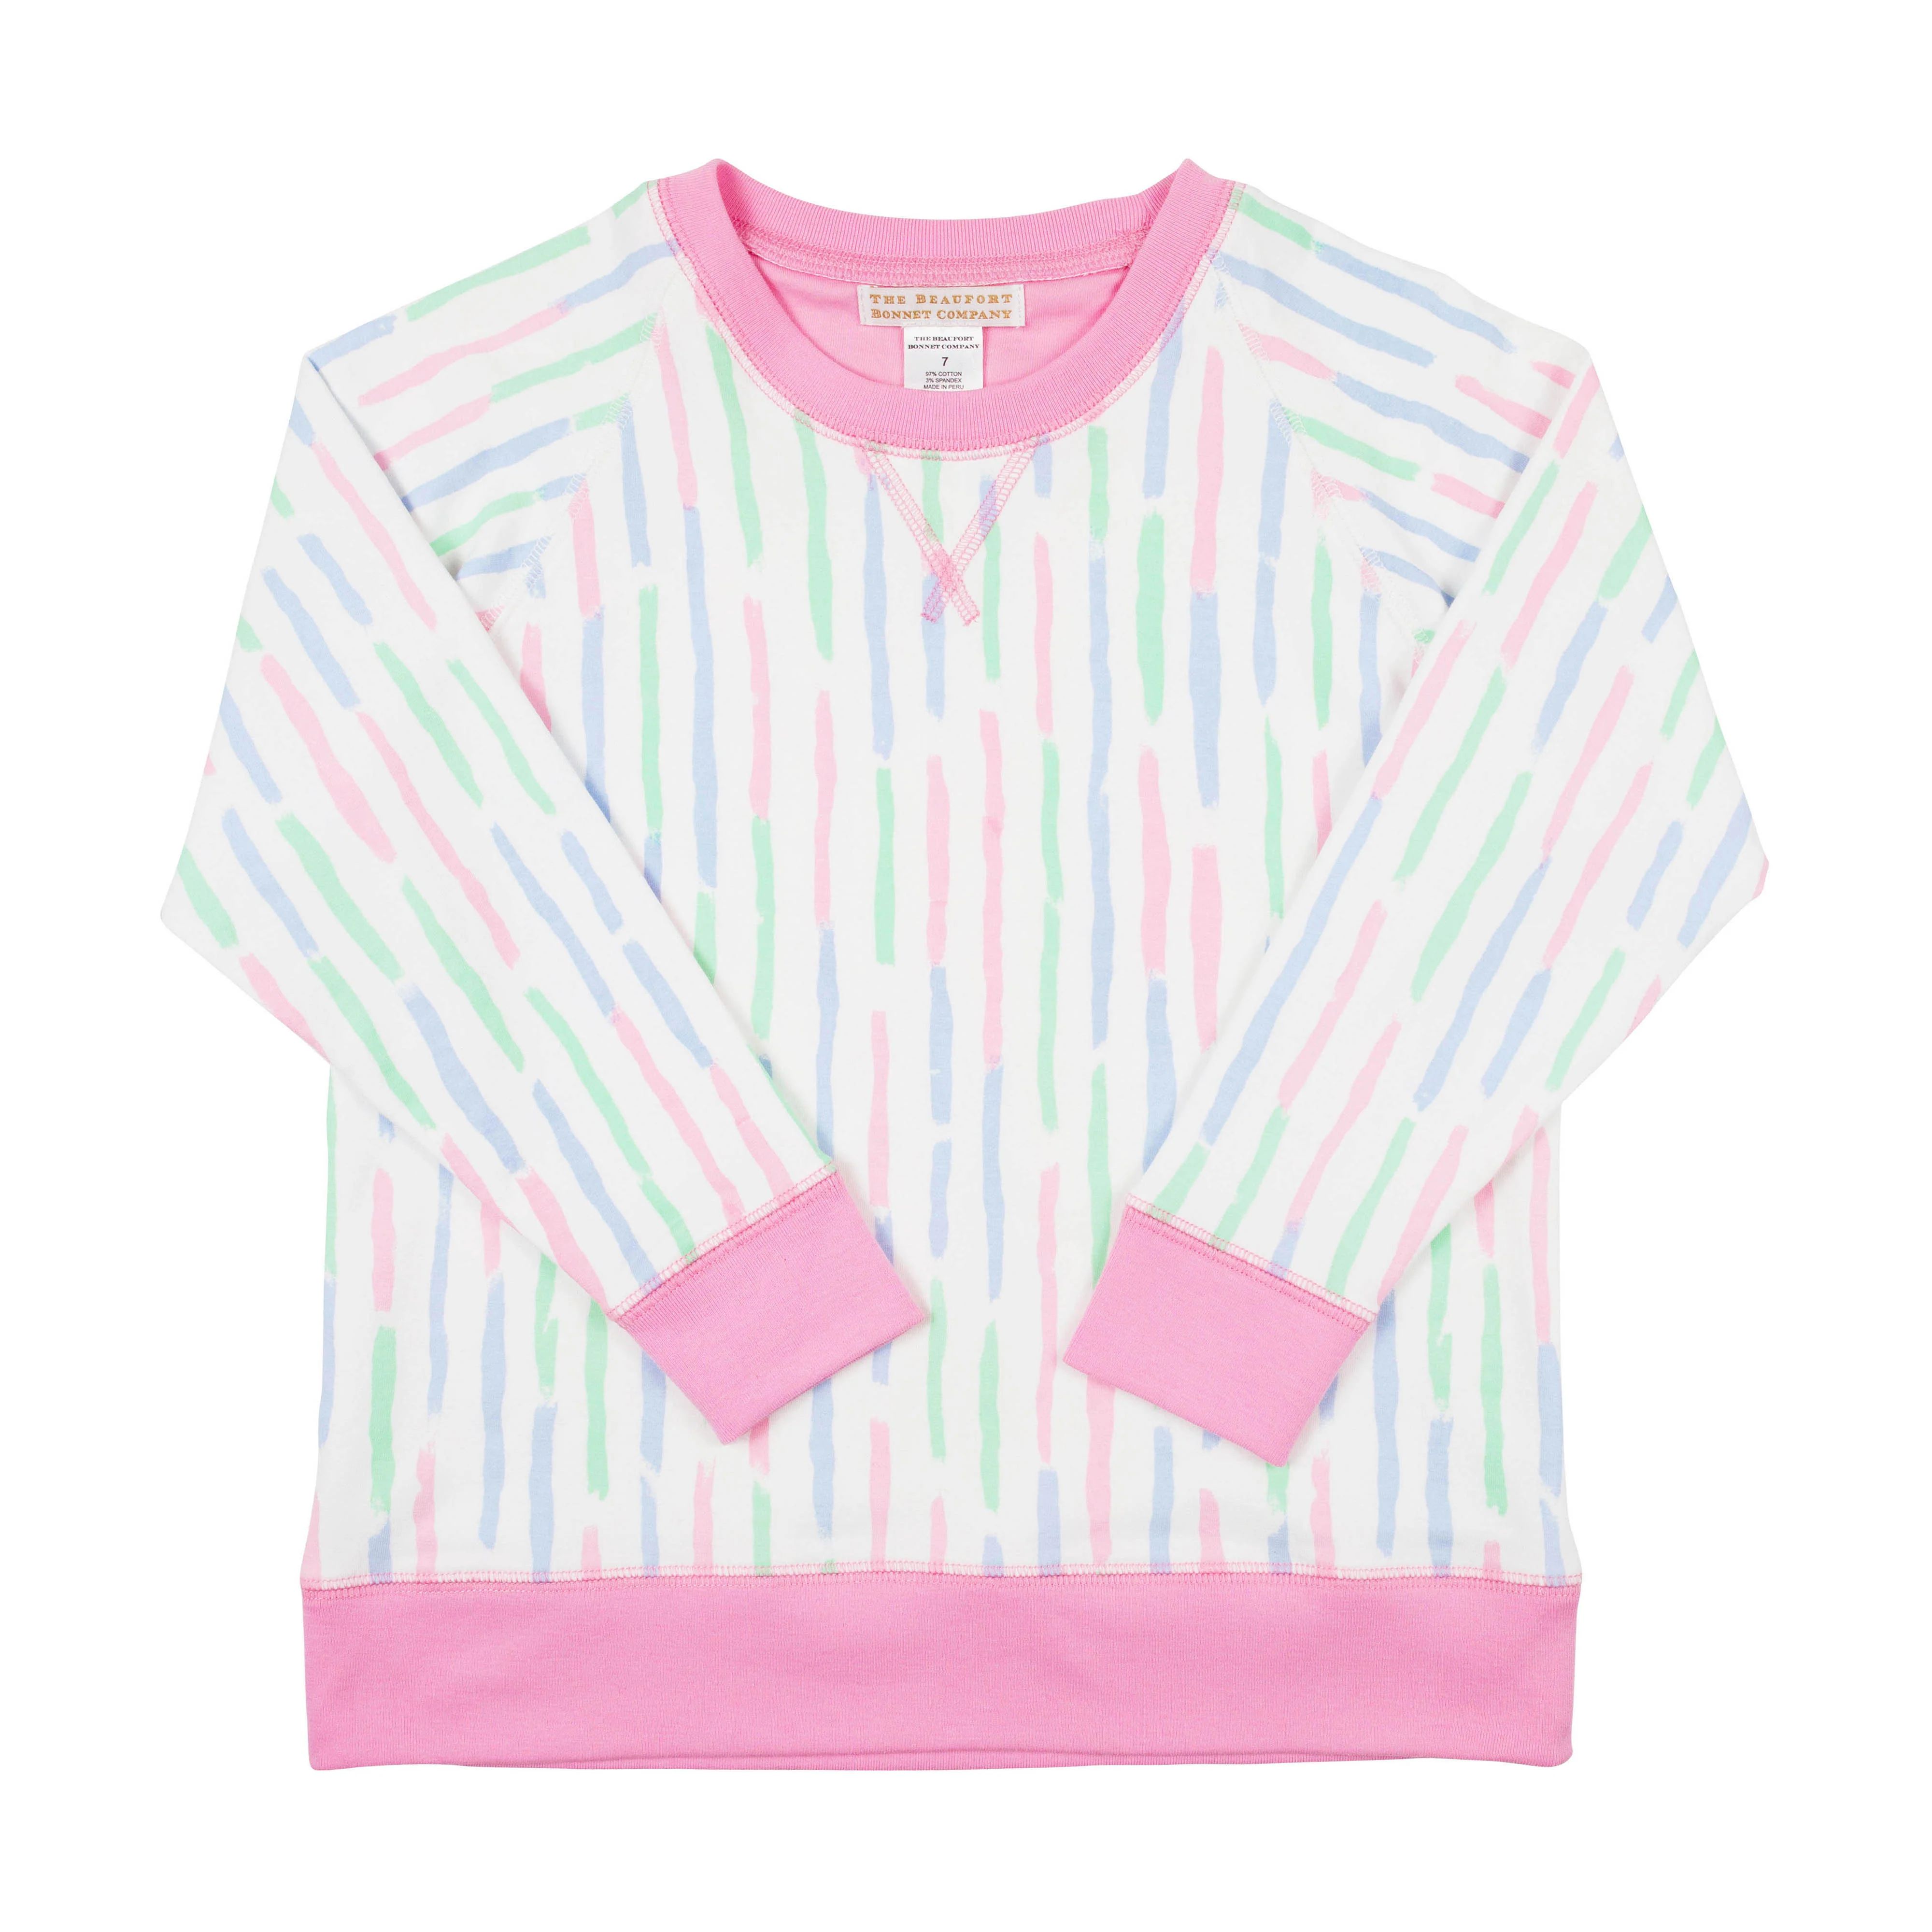 Cassidy Comfy Crewneck - White Sand Watercolor with Hamptons Hot Pink | The Beaufort Bonnet Company